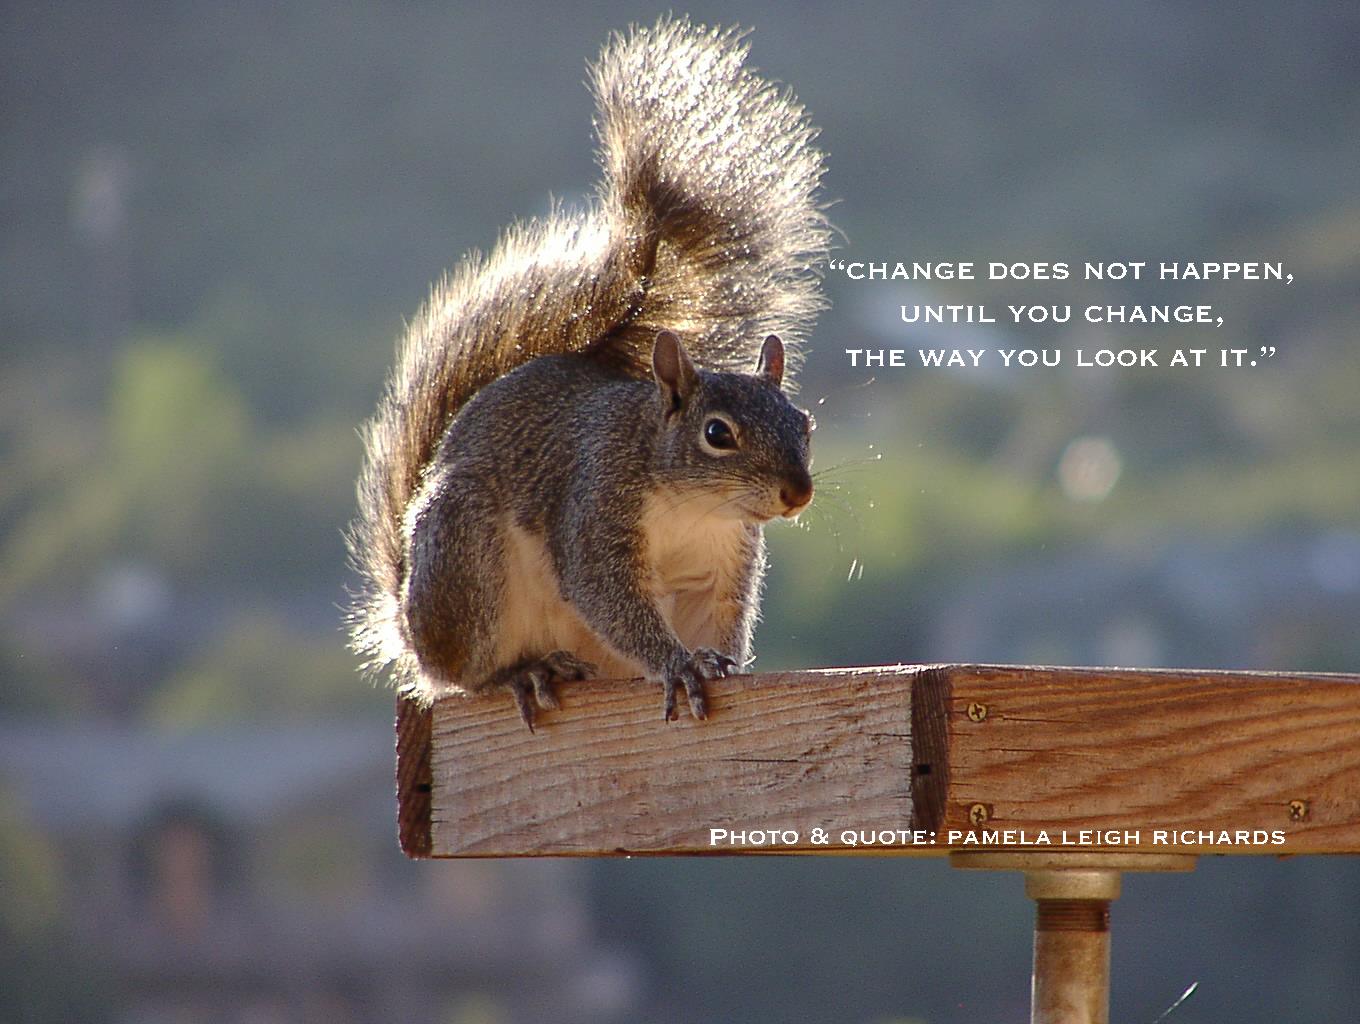 Squirrel Nut Quotes And Sayings. QuotesGram